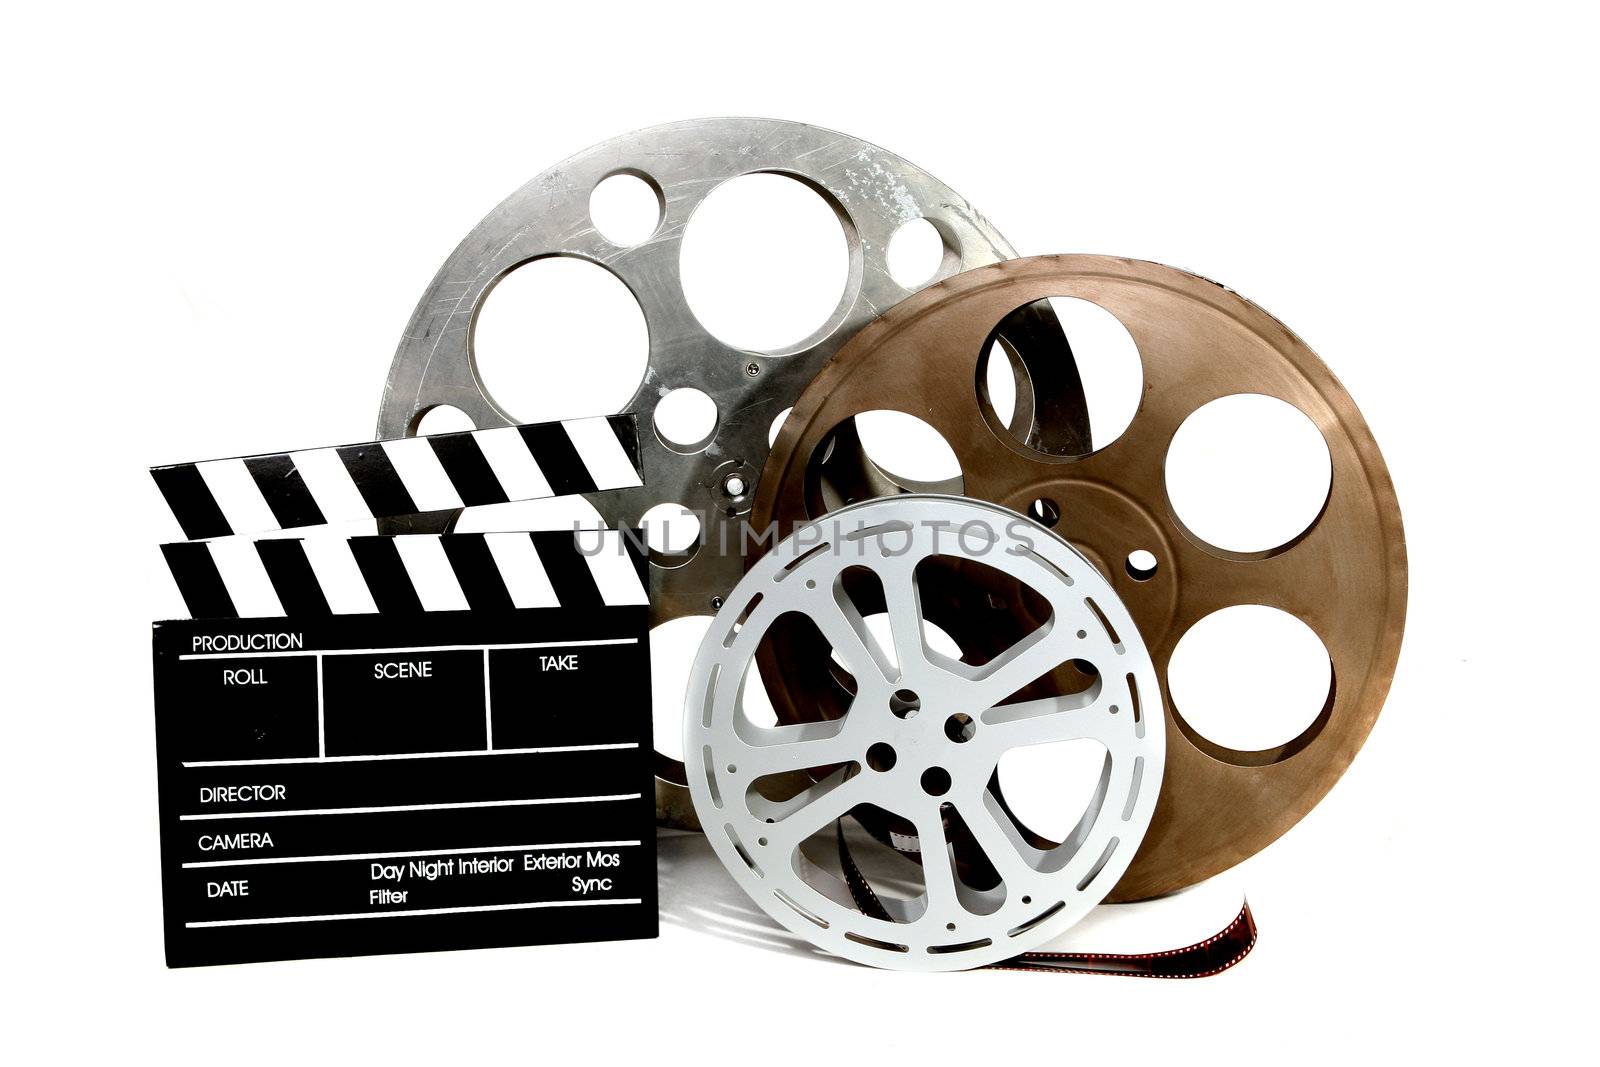 Film Canisters With Directors Clapboard on White Background